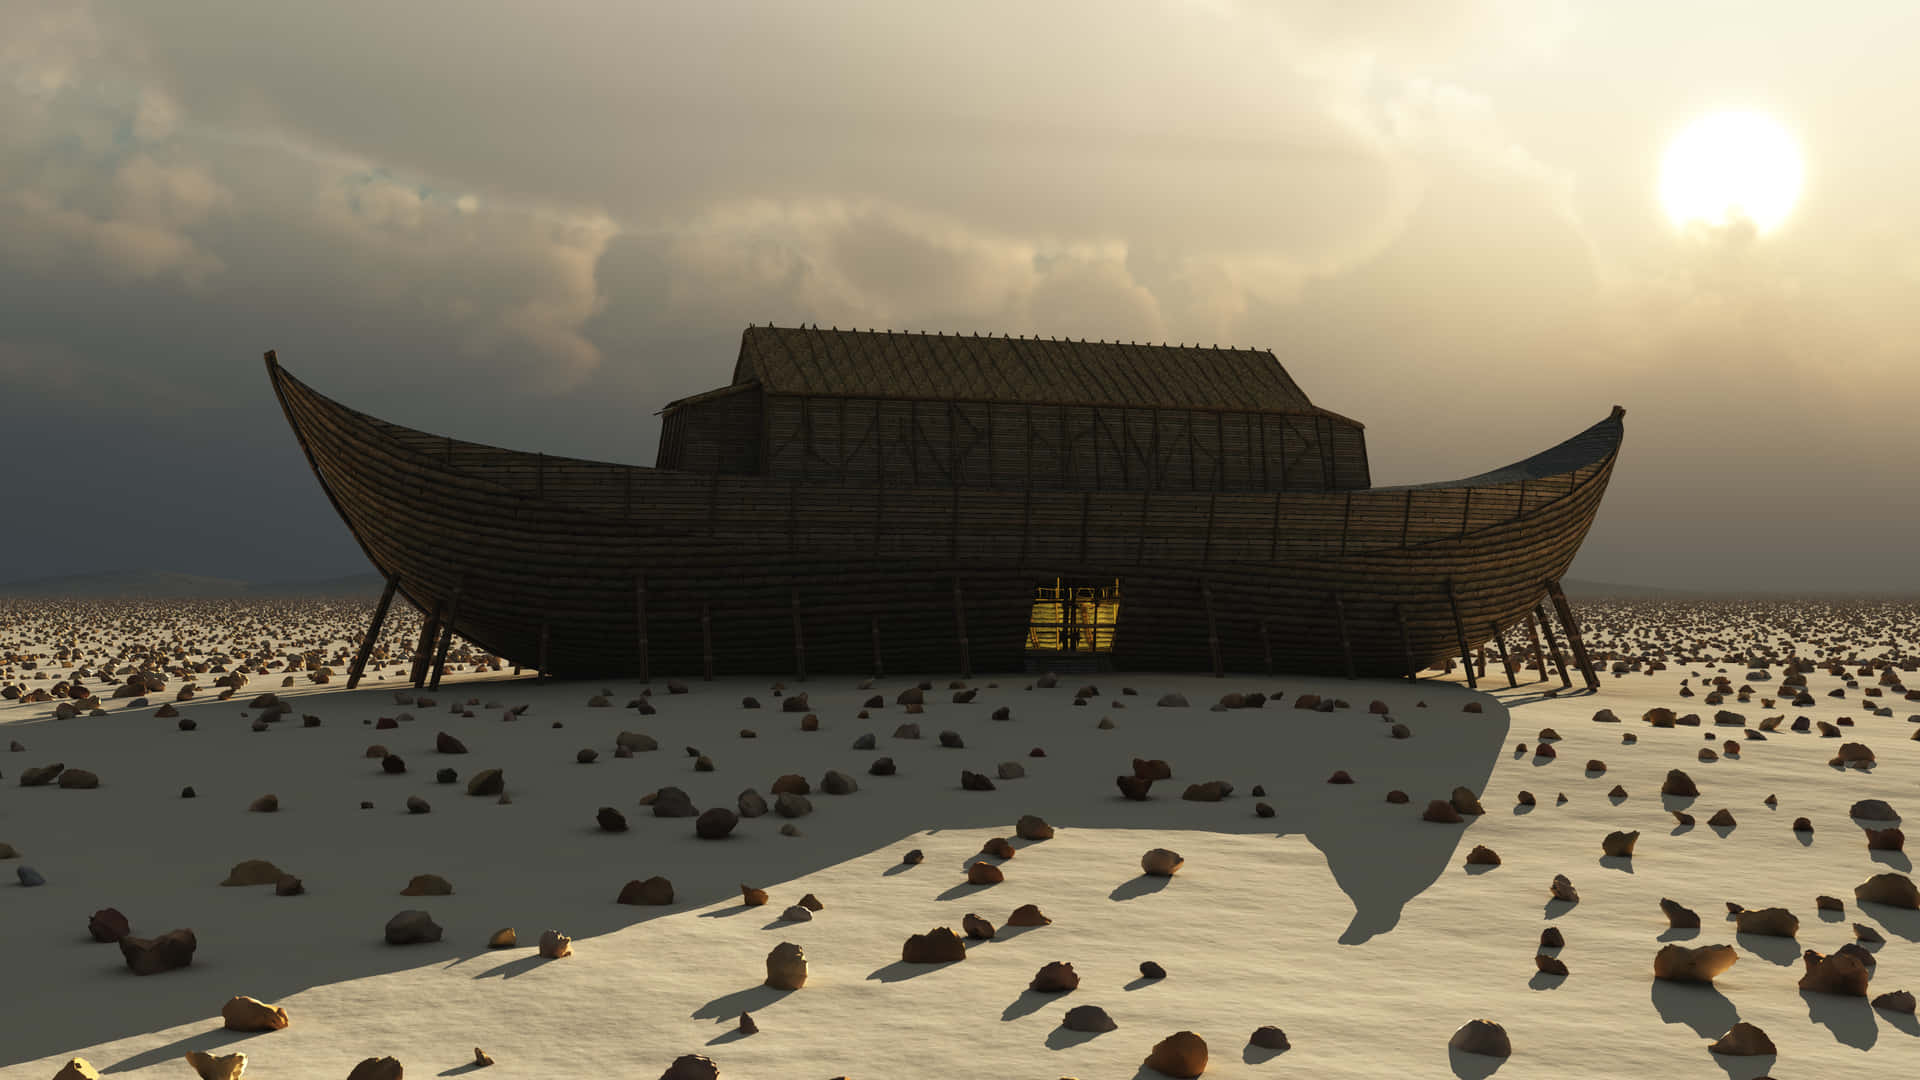 Image  Relive the legendary story of Noah's Ark